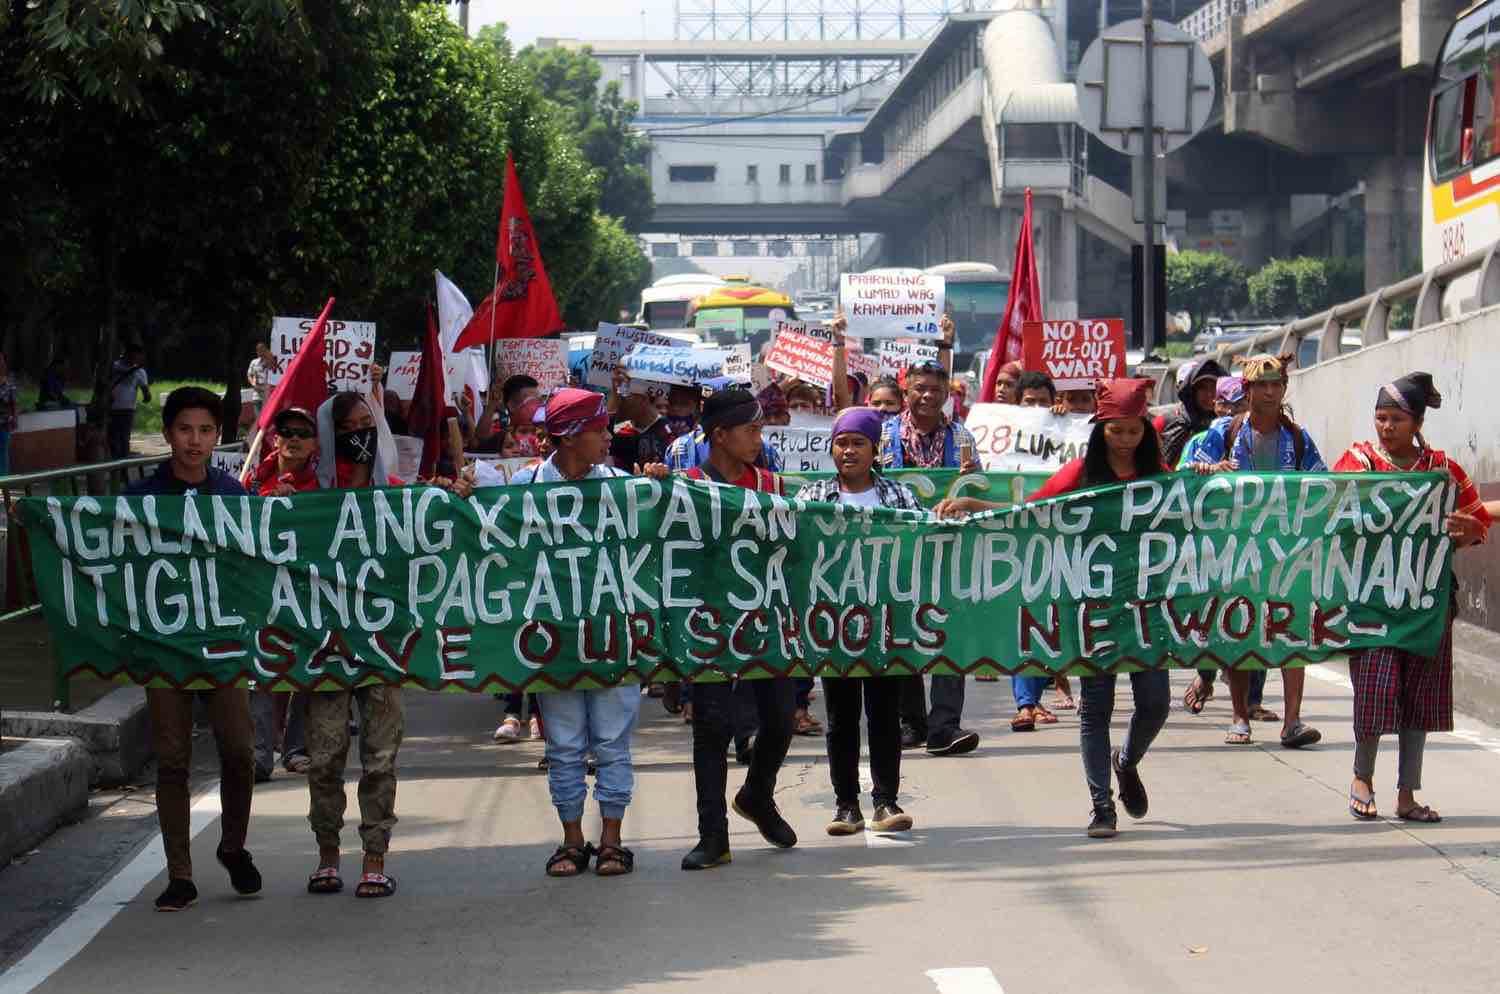 SAVE LUMAD SCHOOLS. The Lumad from Mindanao hold a rally on August 9, 2017 to protest against the alleged military attacks on Lumad schools and communities, slamming President Rodrigo Duterte's earlier statement that he will order the military to 'bomb lumad schools'. Photo by Darren Langit/Rappler 